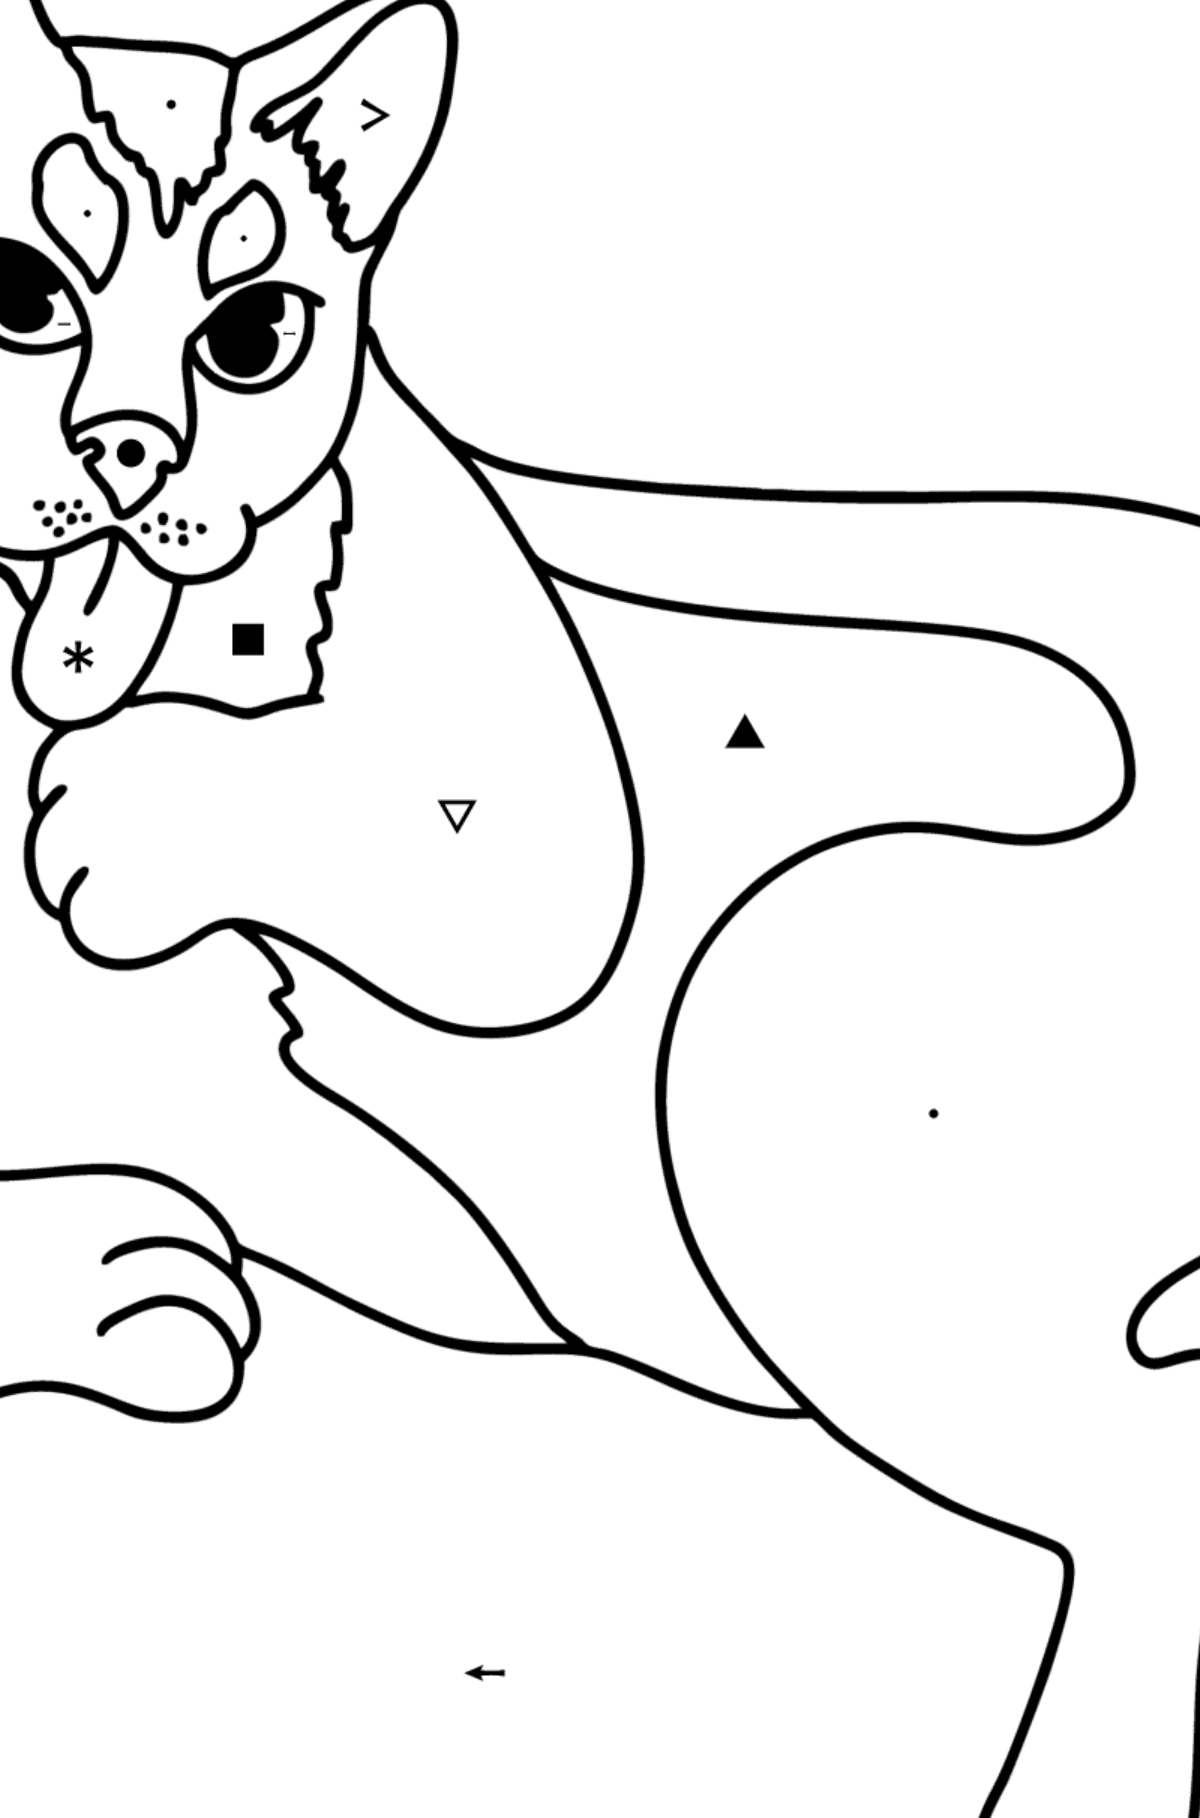 Black Cat coloring page - Coloring by Symbols for Kids